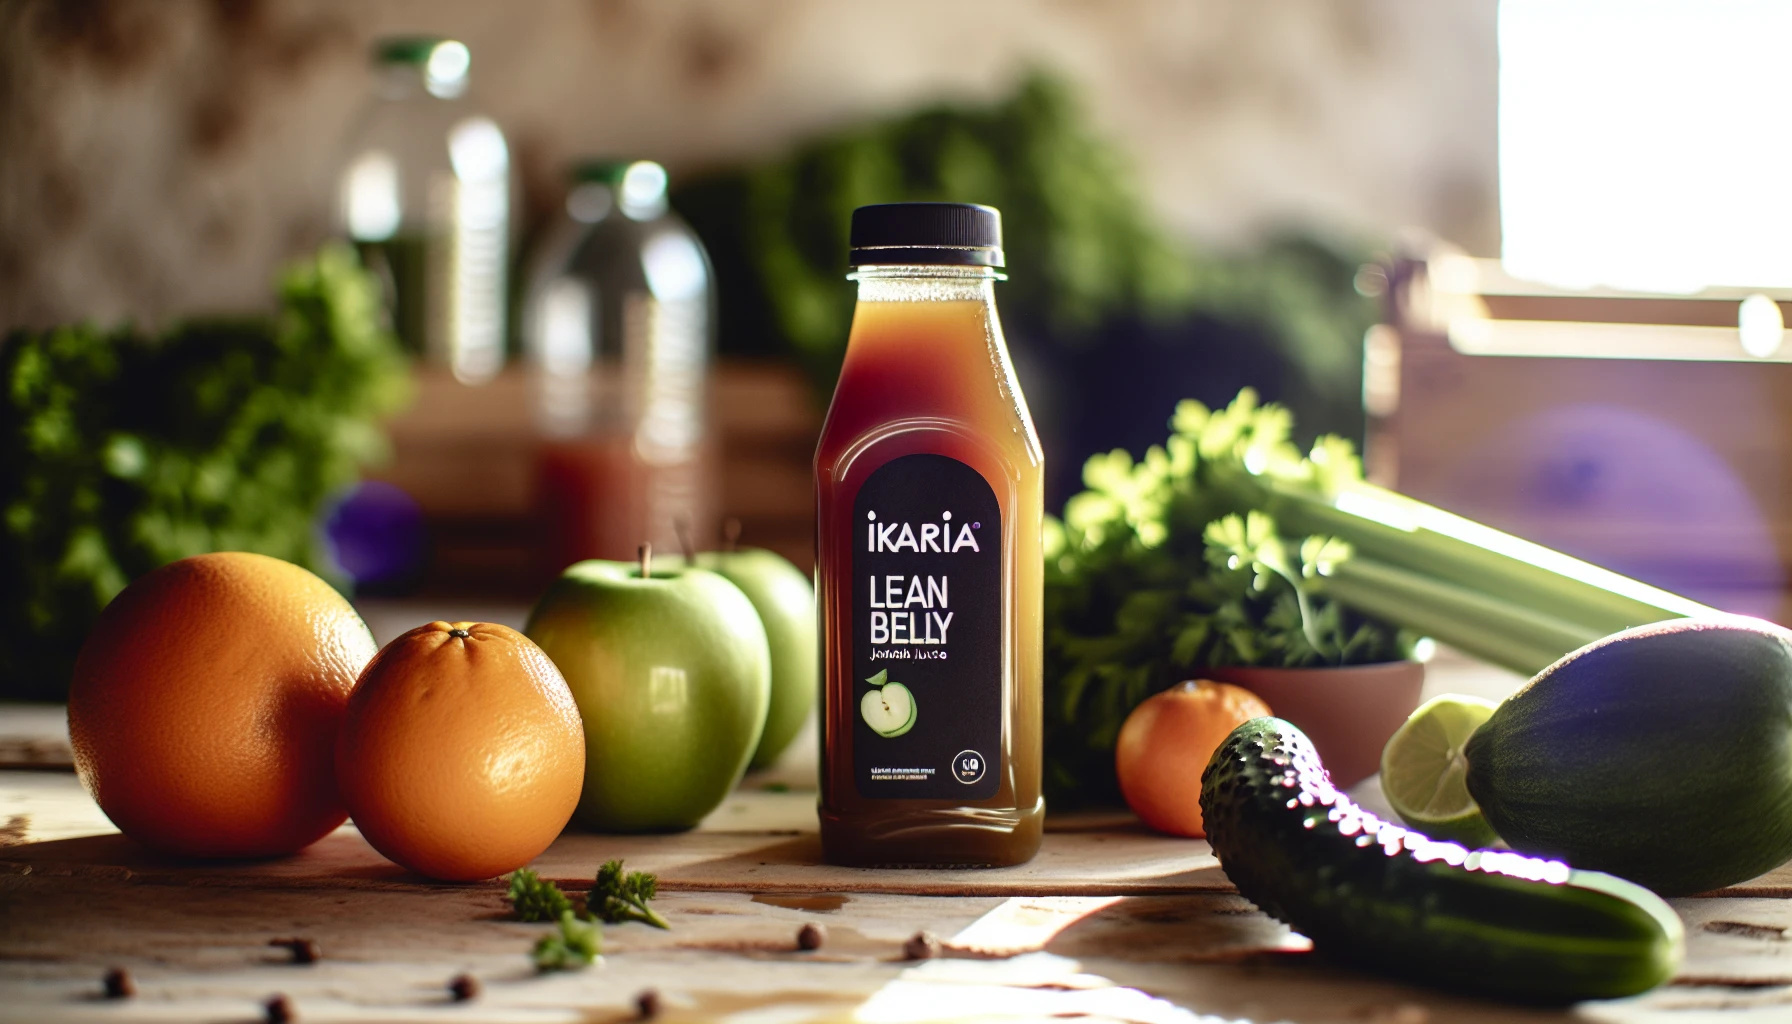 Bottle of Ikaria Lean Belly Juice surrounded by fresh ingredients